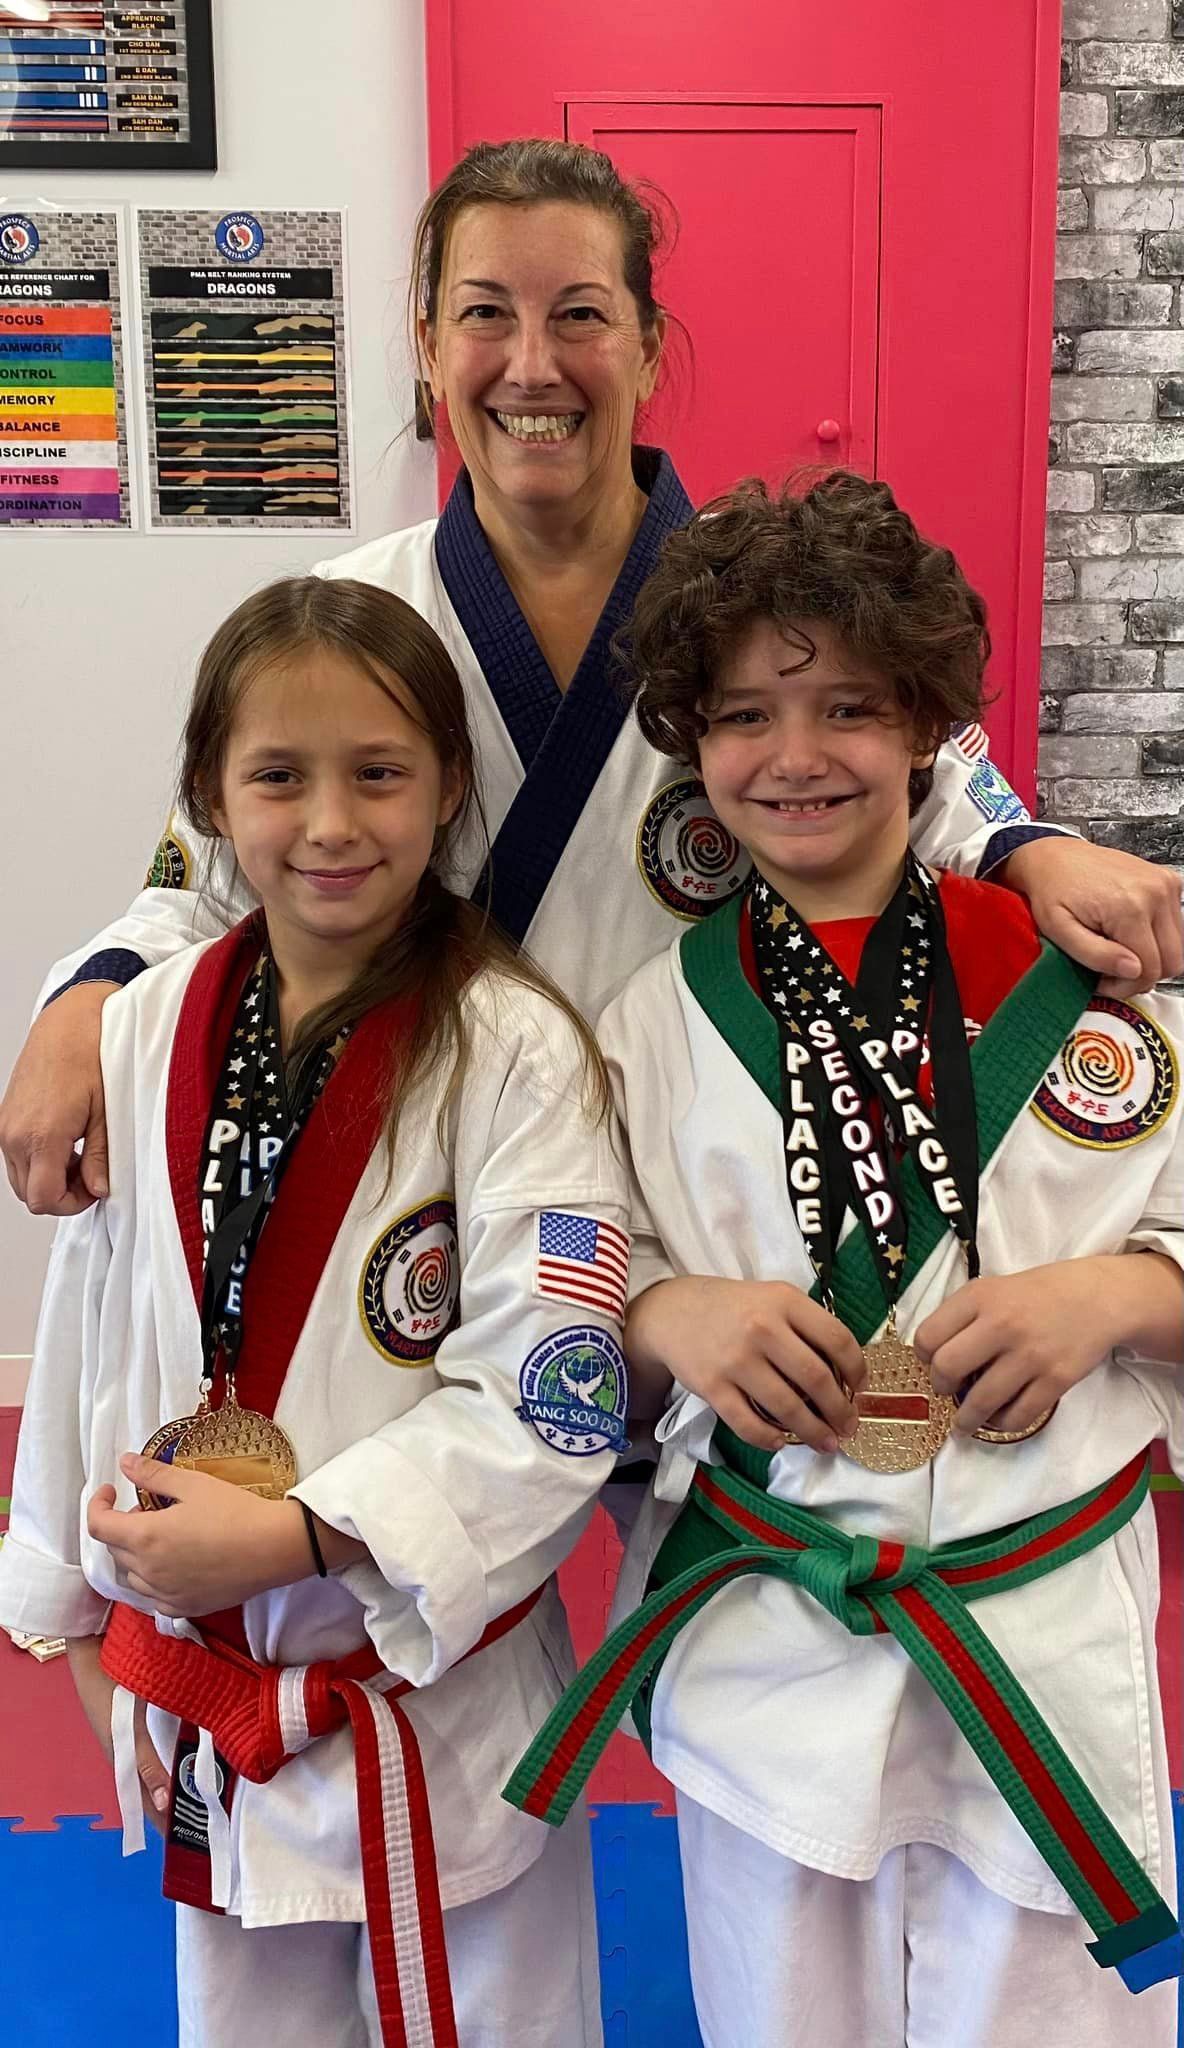 a woman is standing next to two children in karate uniforms holding medals .